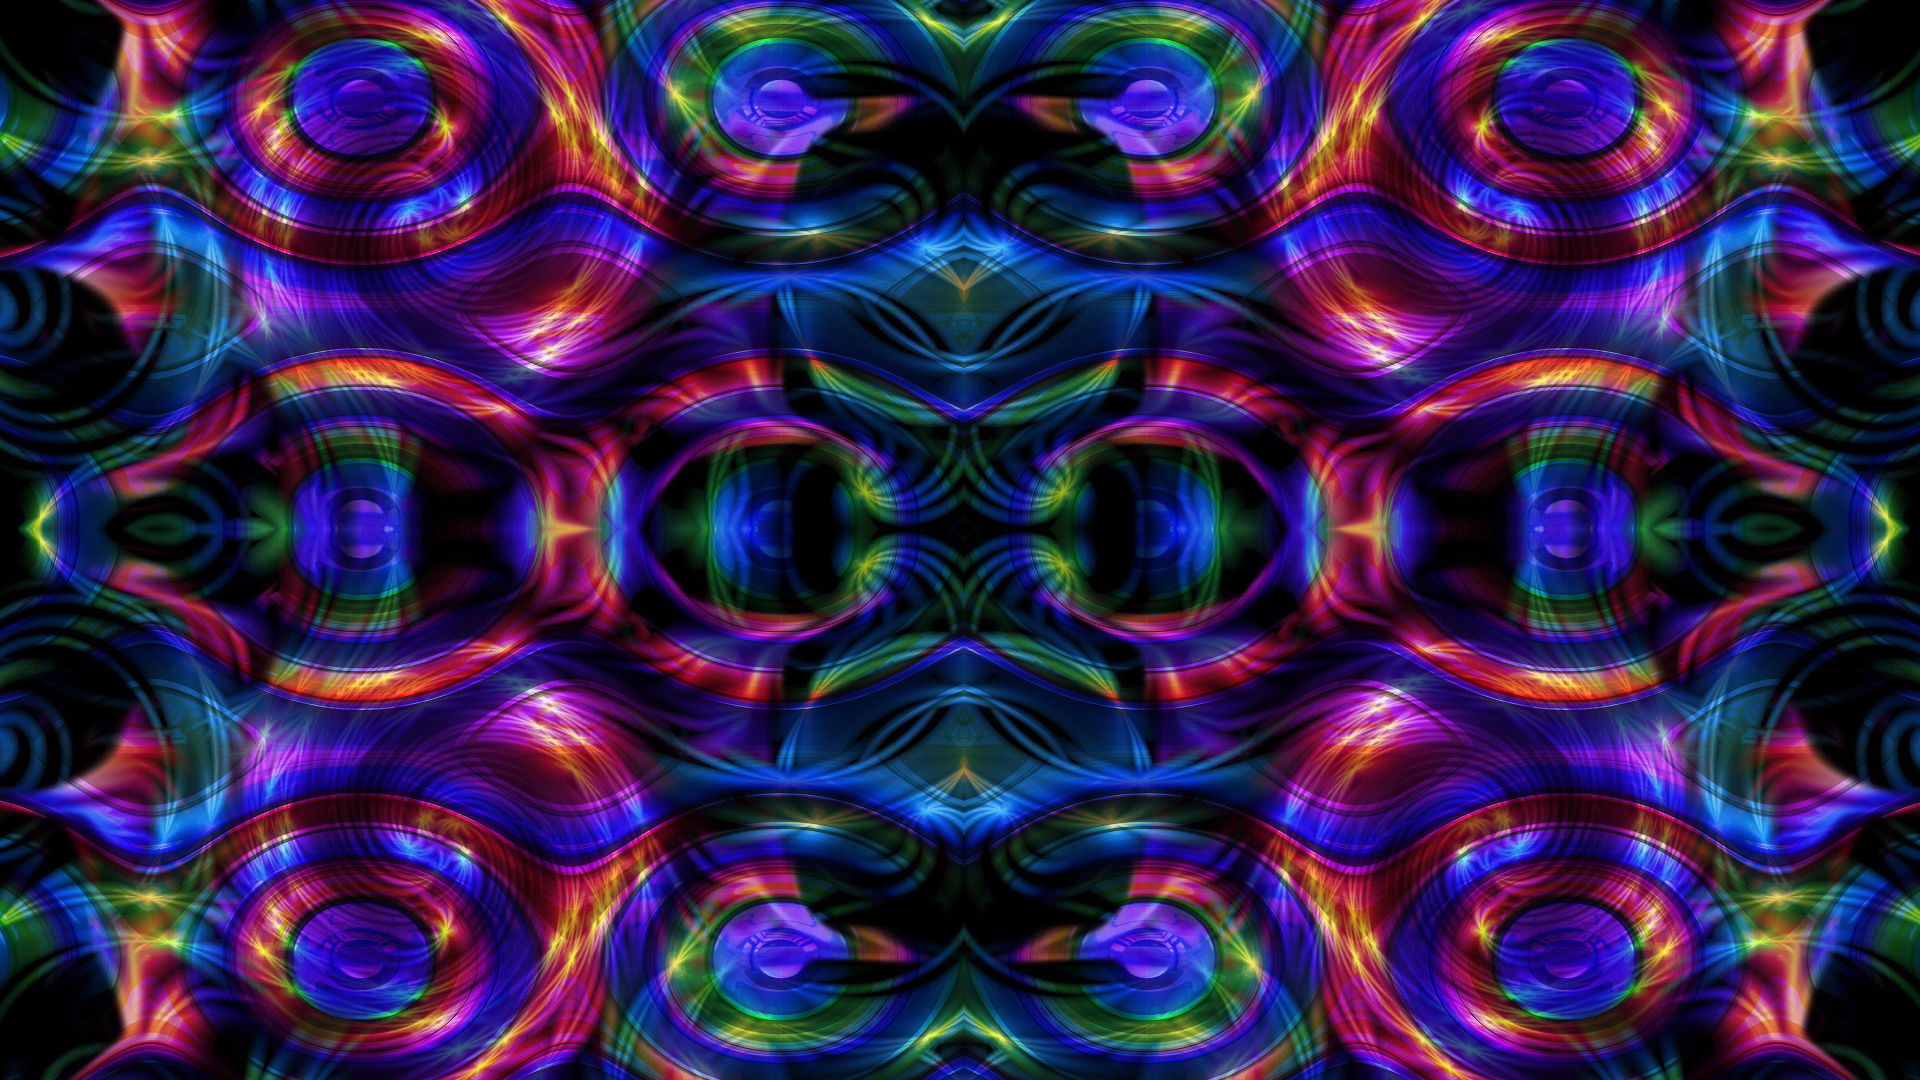 Artistic Colors Digital Art Pattern Psychedelic 1920x1080